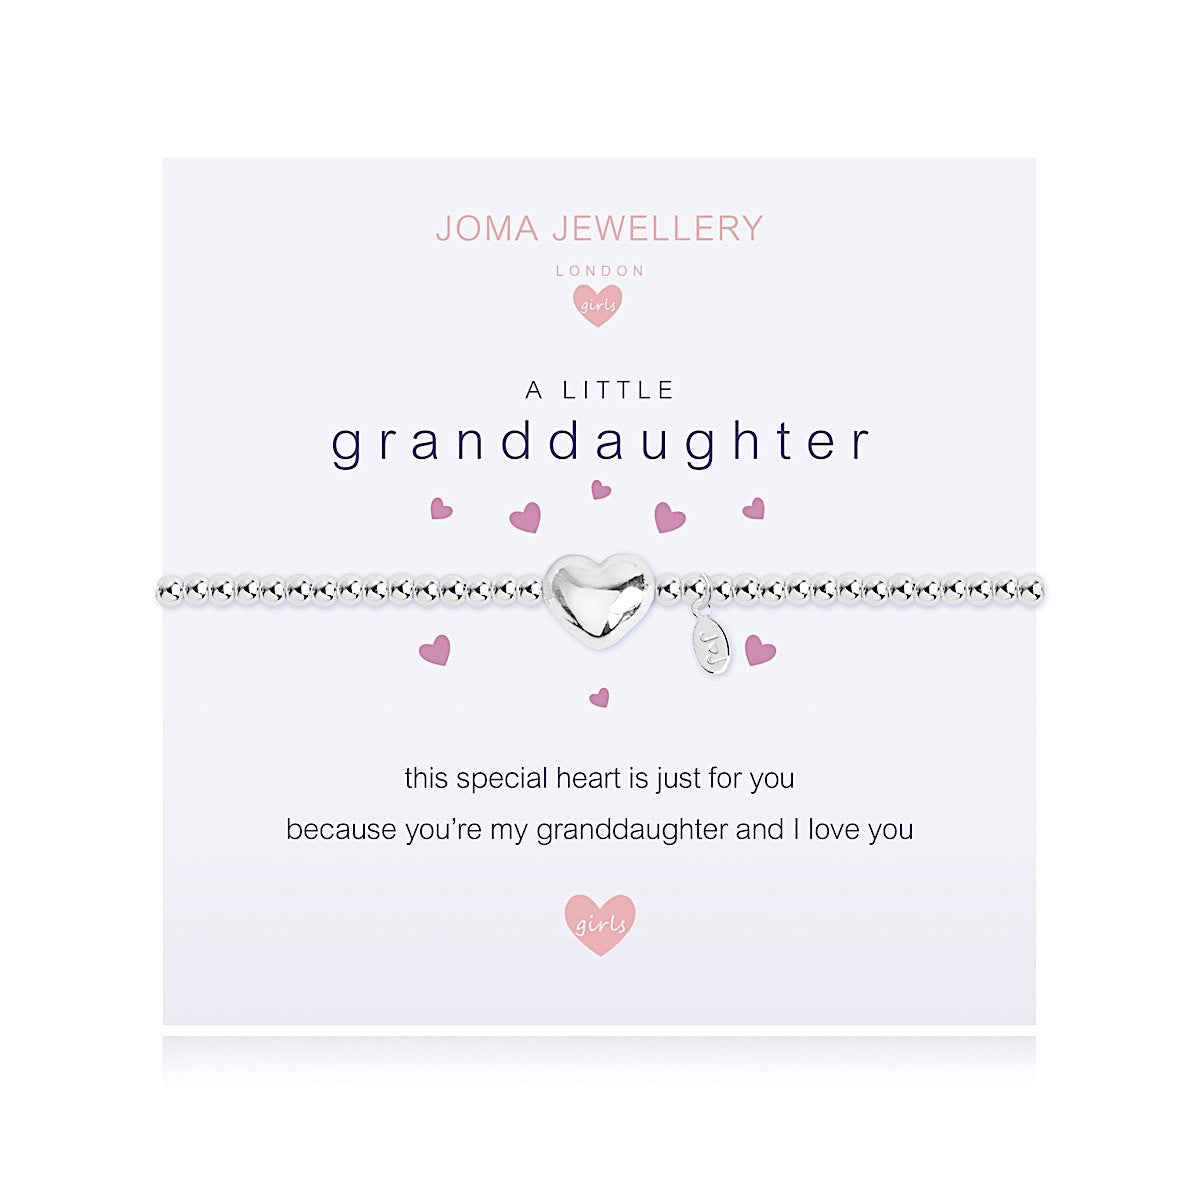 Joma Girls a little Granddaughter Bracelet - More Than Just a Gift